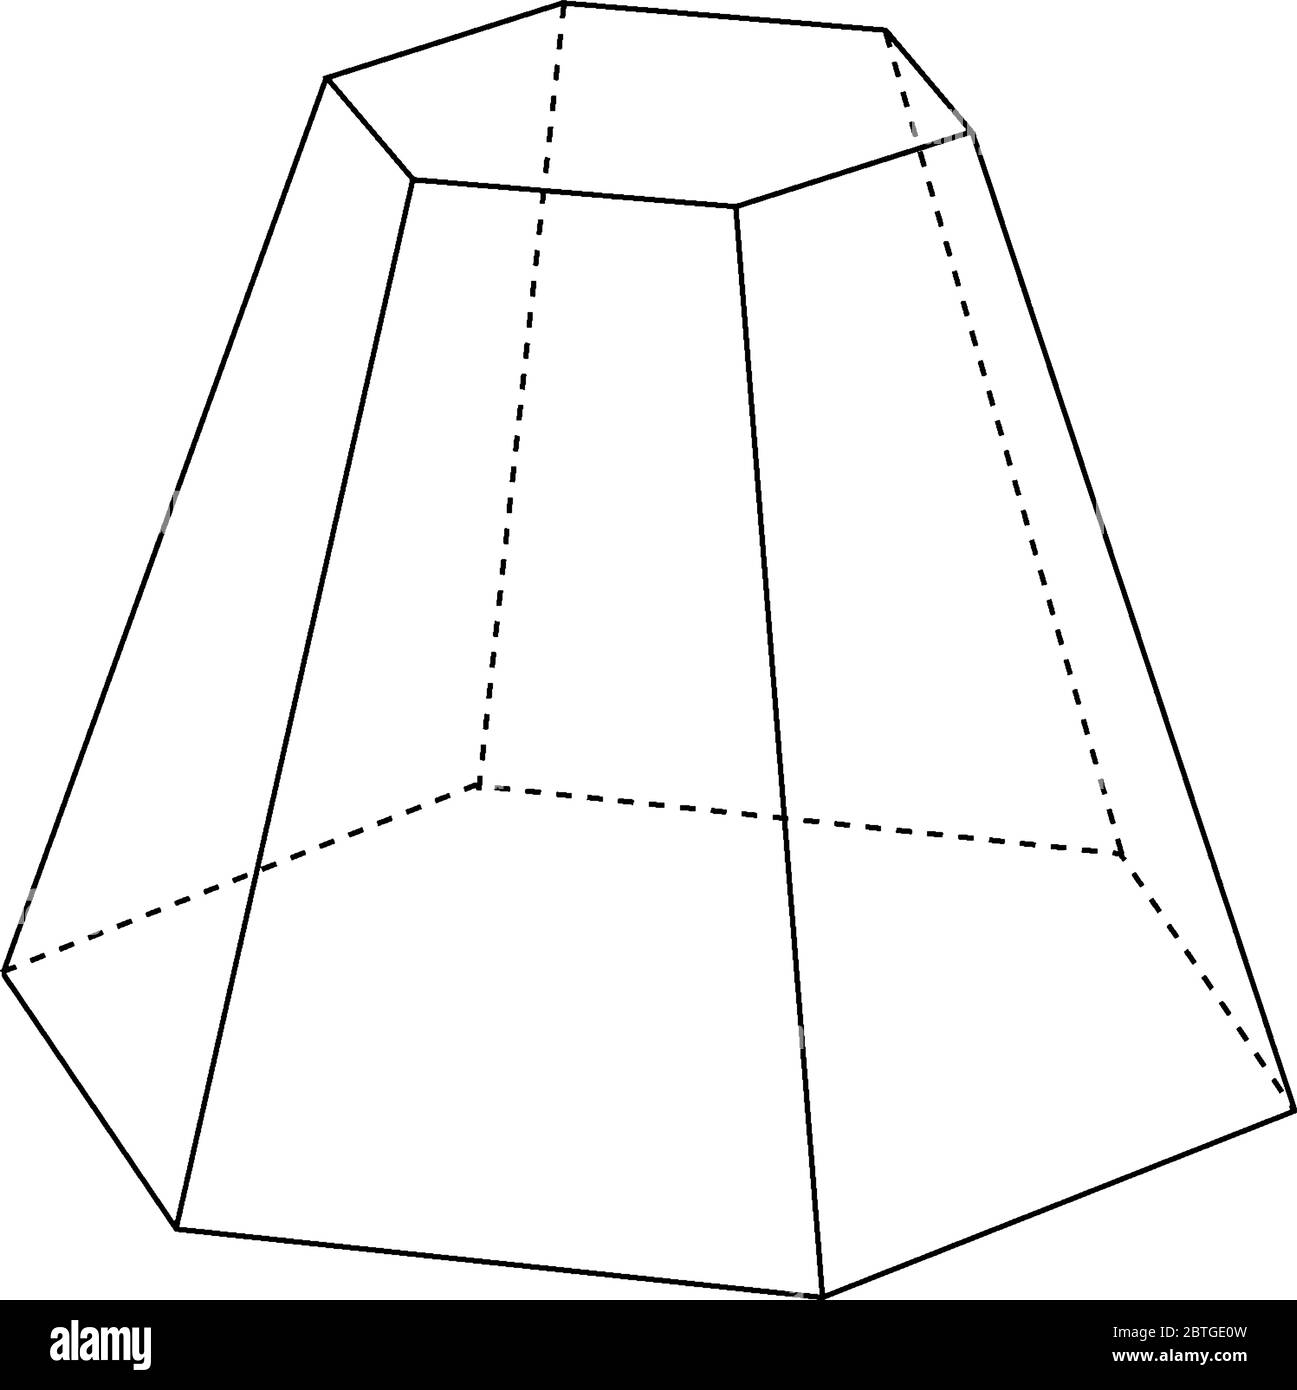 It’s a shape of hexagonal pyramid. It has six sides and all are equal by angle and length, vintage line drawing or engraving illustration. Stock Vector